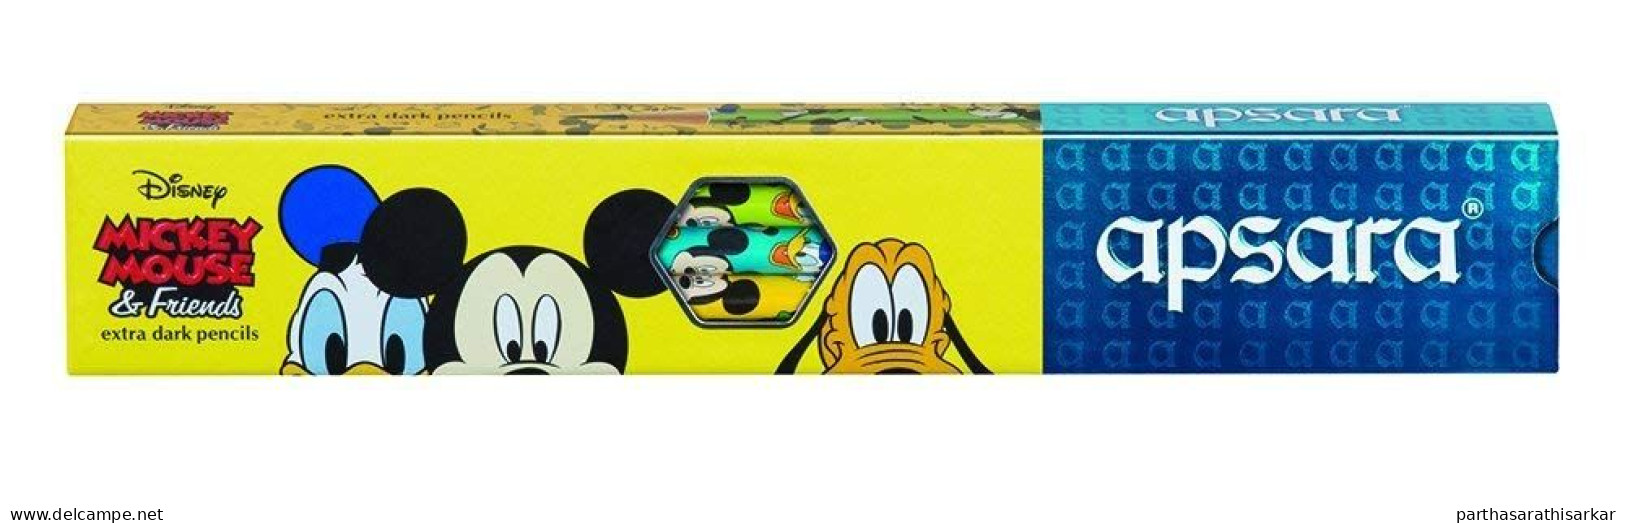 MICKY MOUSE DISNEY PENCILS FROM INDIAN BRAND APSARA SET OF 5 PENCILS (2 SETS IN A PACK) - Cachets